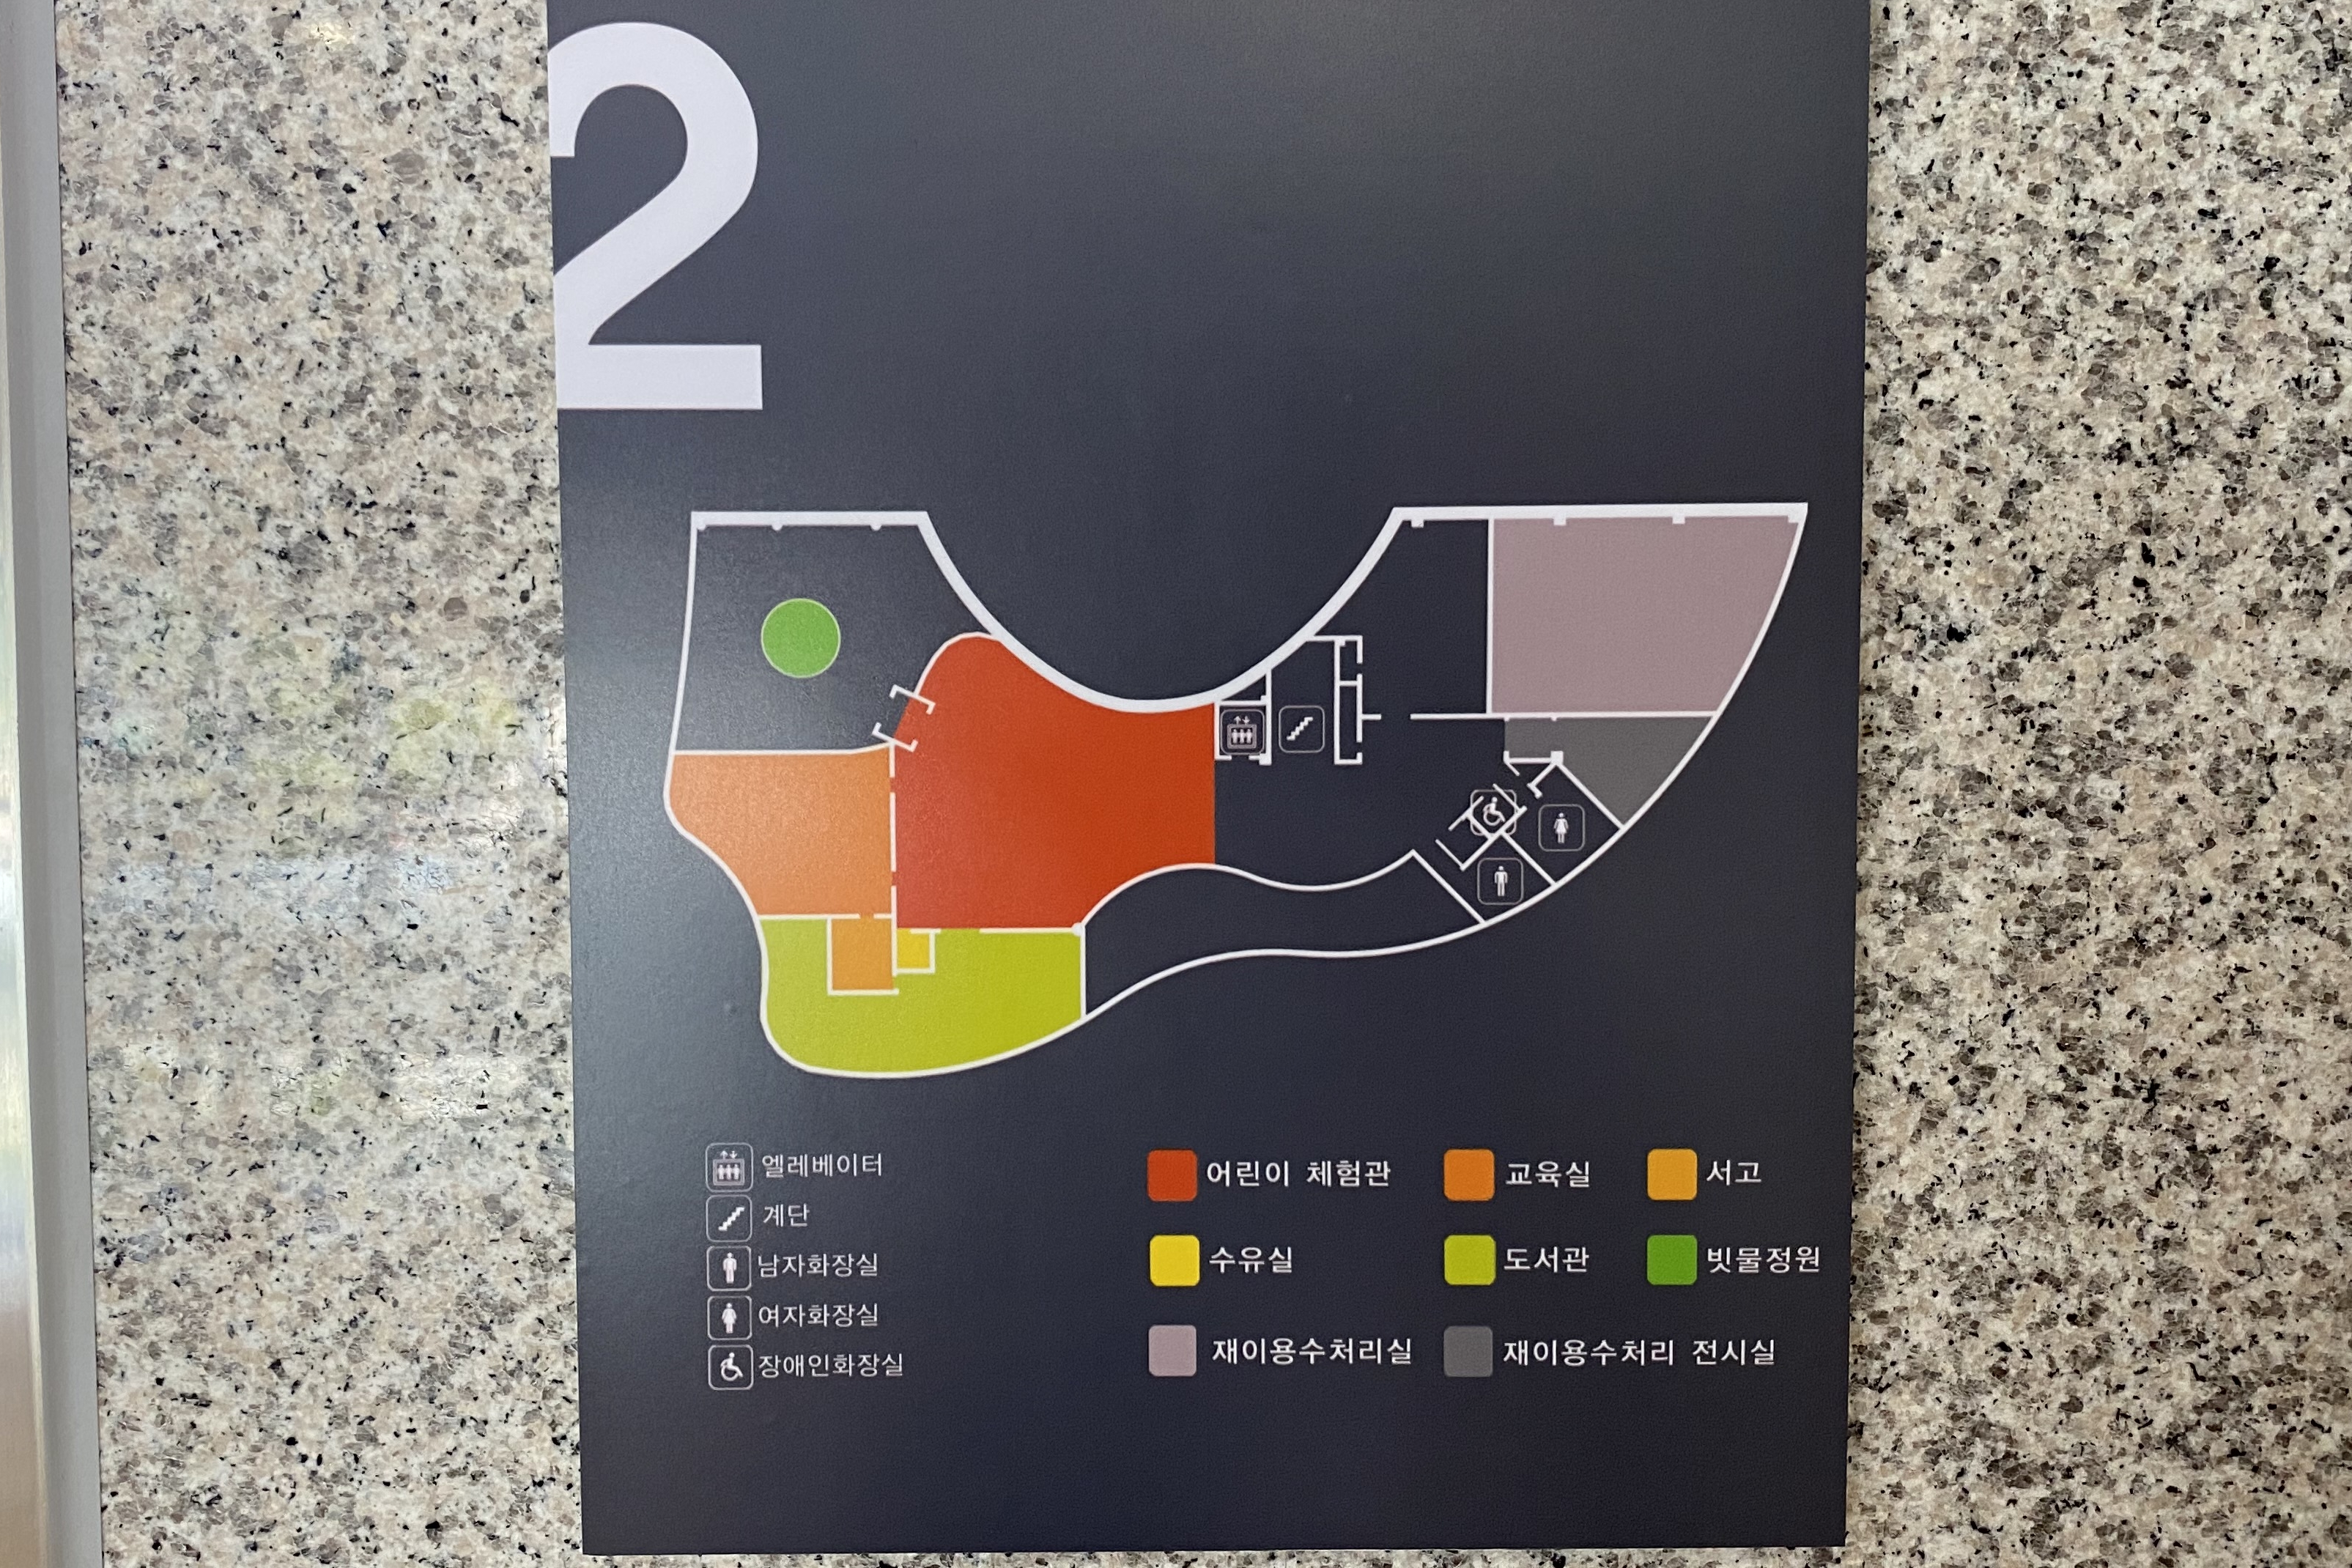 Guide map and information desk0 : Guide map of Seoul Sewerage Science Museum